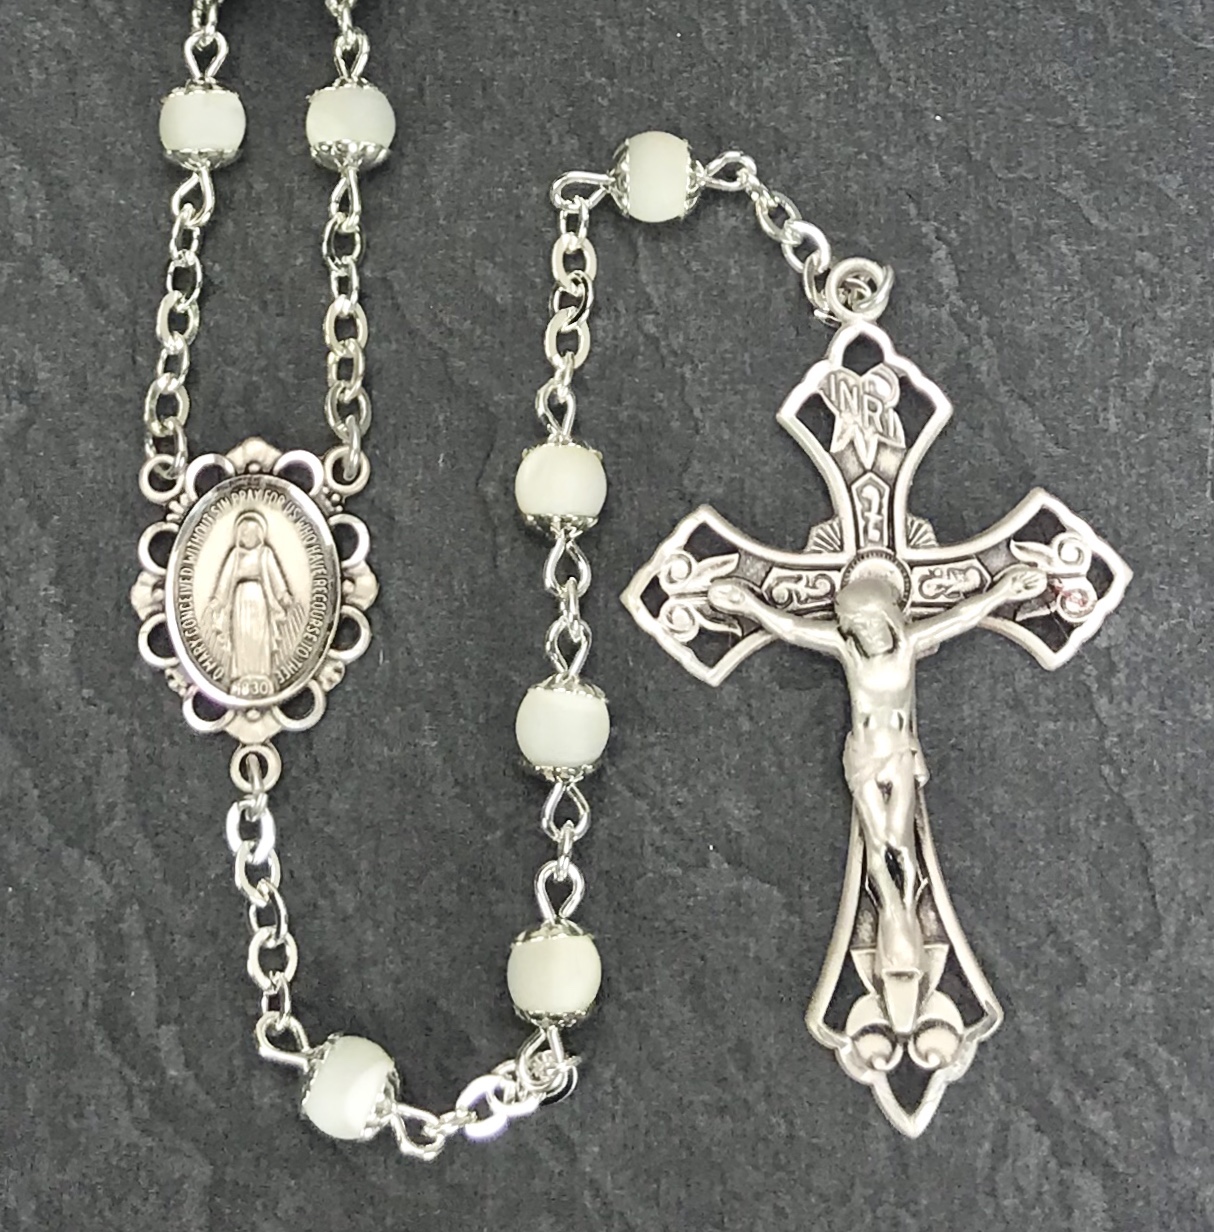 6mm ROUND MOTHER OF PEARL CAPPED GEMSTONE ALL STERLING SILVER ROSARY